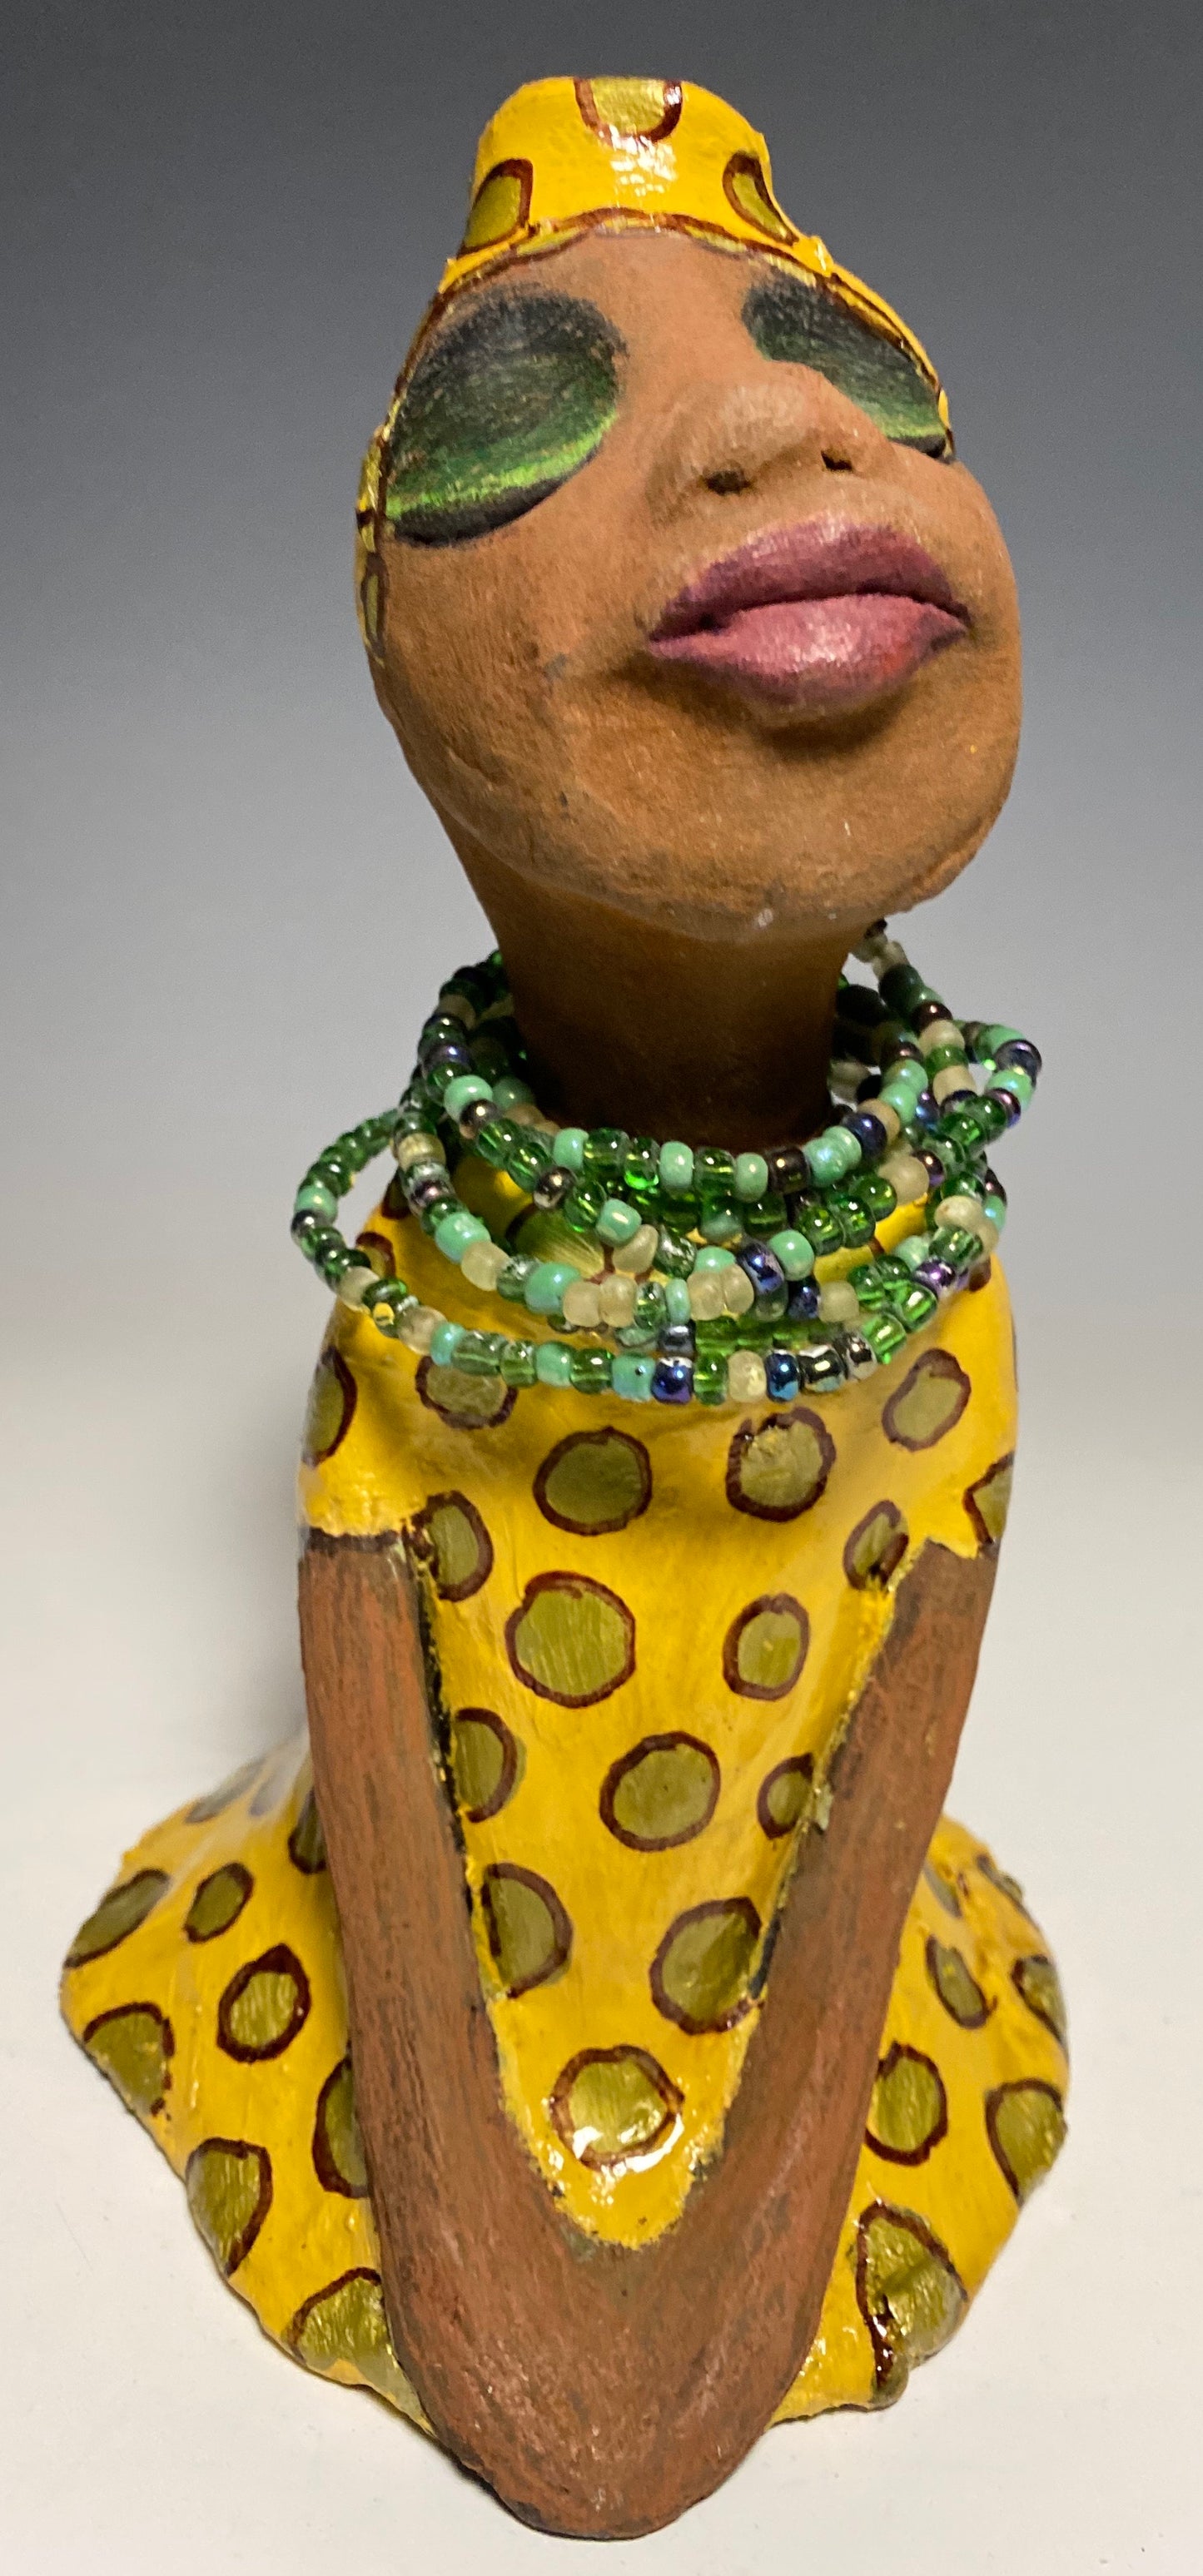 Meet Sharon! Sharon stands" 8 x 5" x 5" and weighs 1.5 lbs She wears a cute spotted autumn yellow dress with matching hat and emerald green beads. Her long loving arms rest at her side. Check out Sharon's little sister named Shelia! With the current situation we All are going through, Shelia will place a smile on your face during this challenging time. 